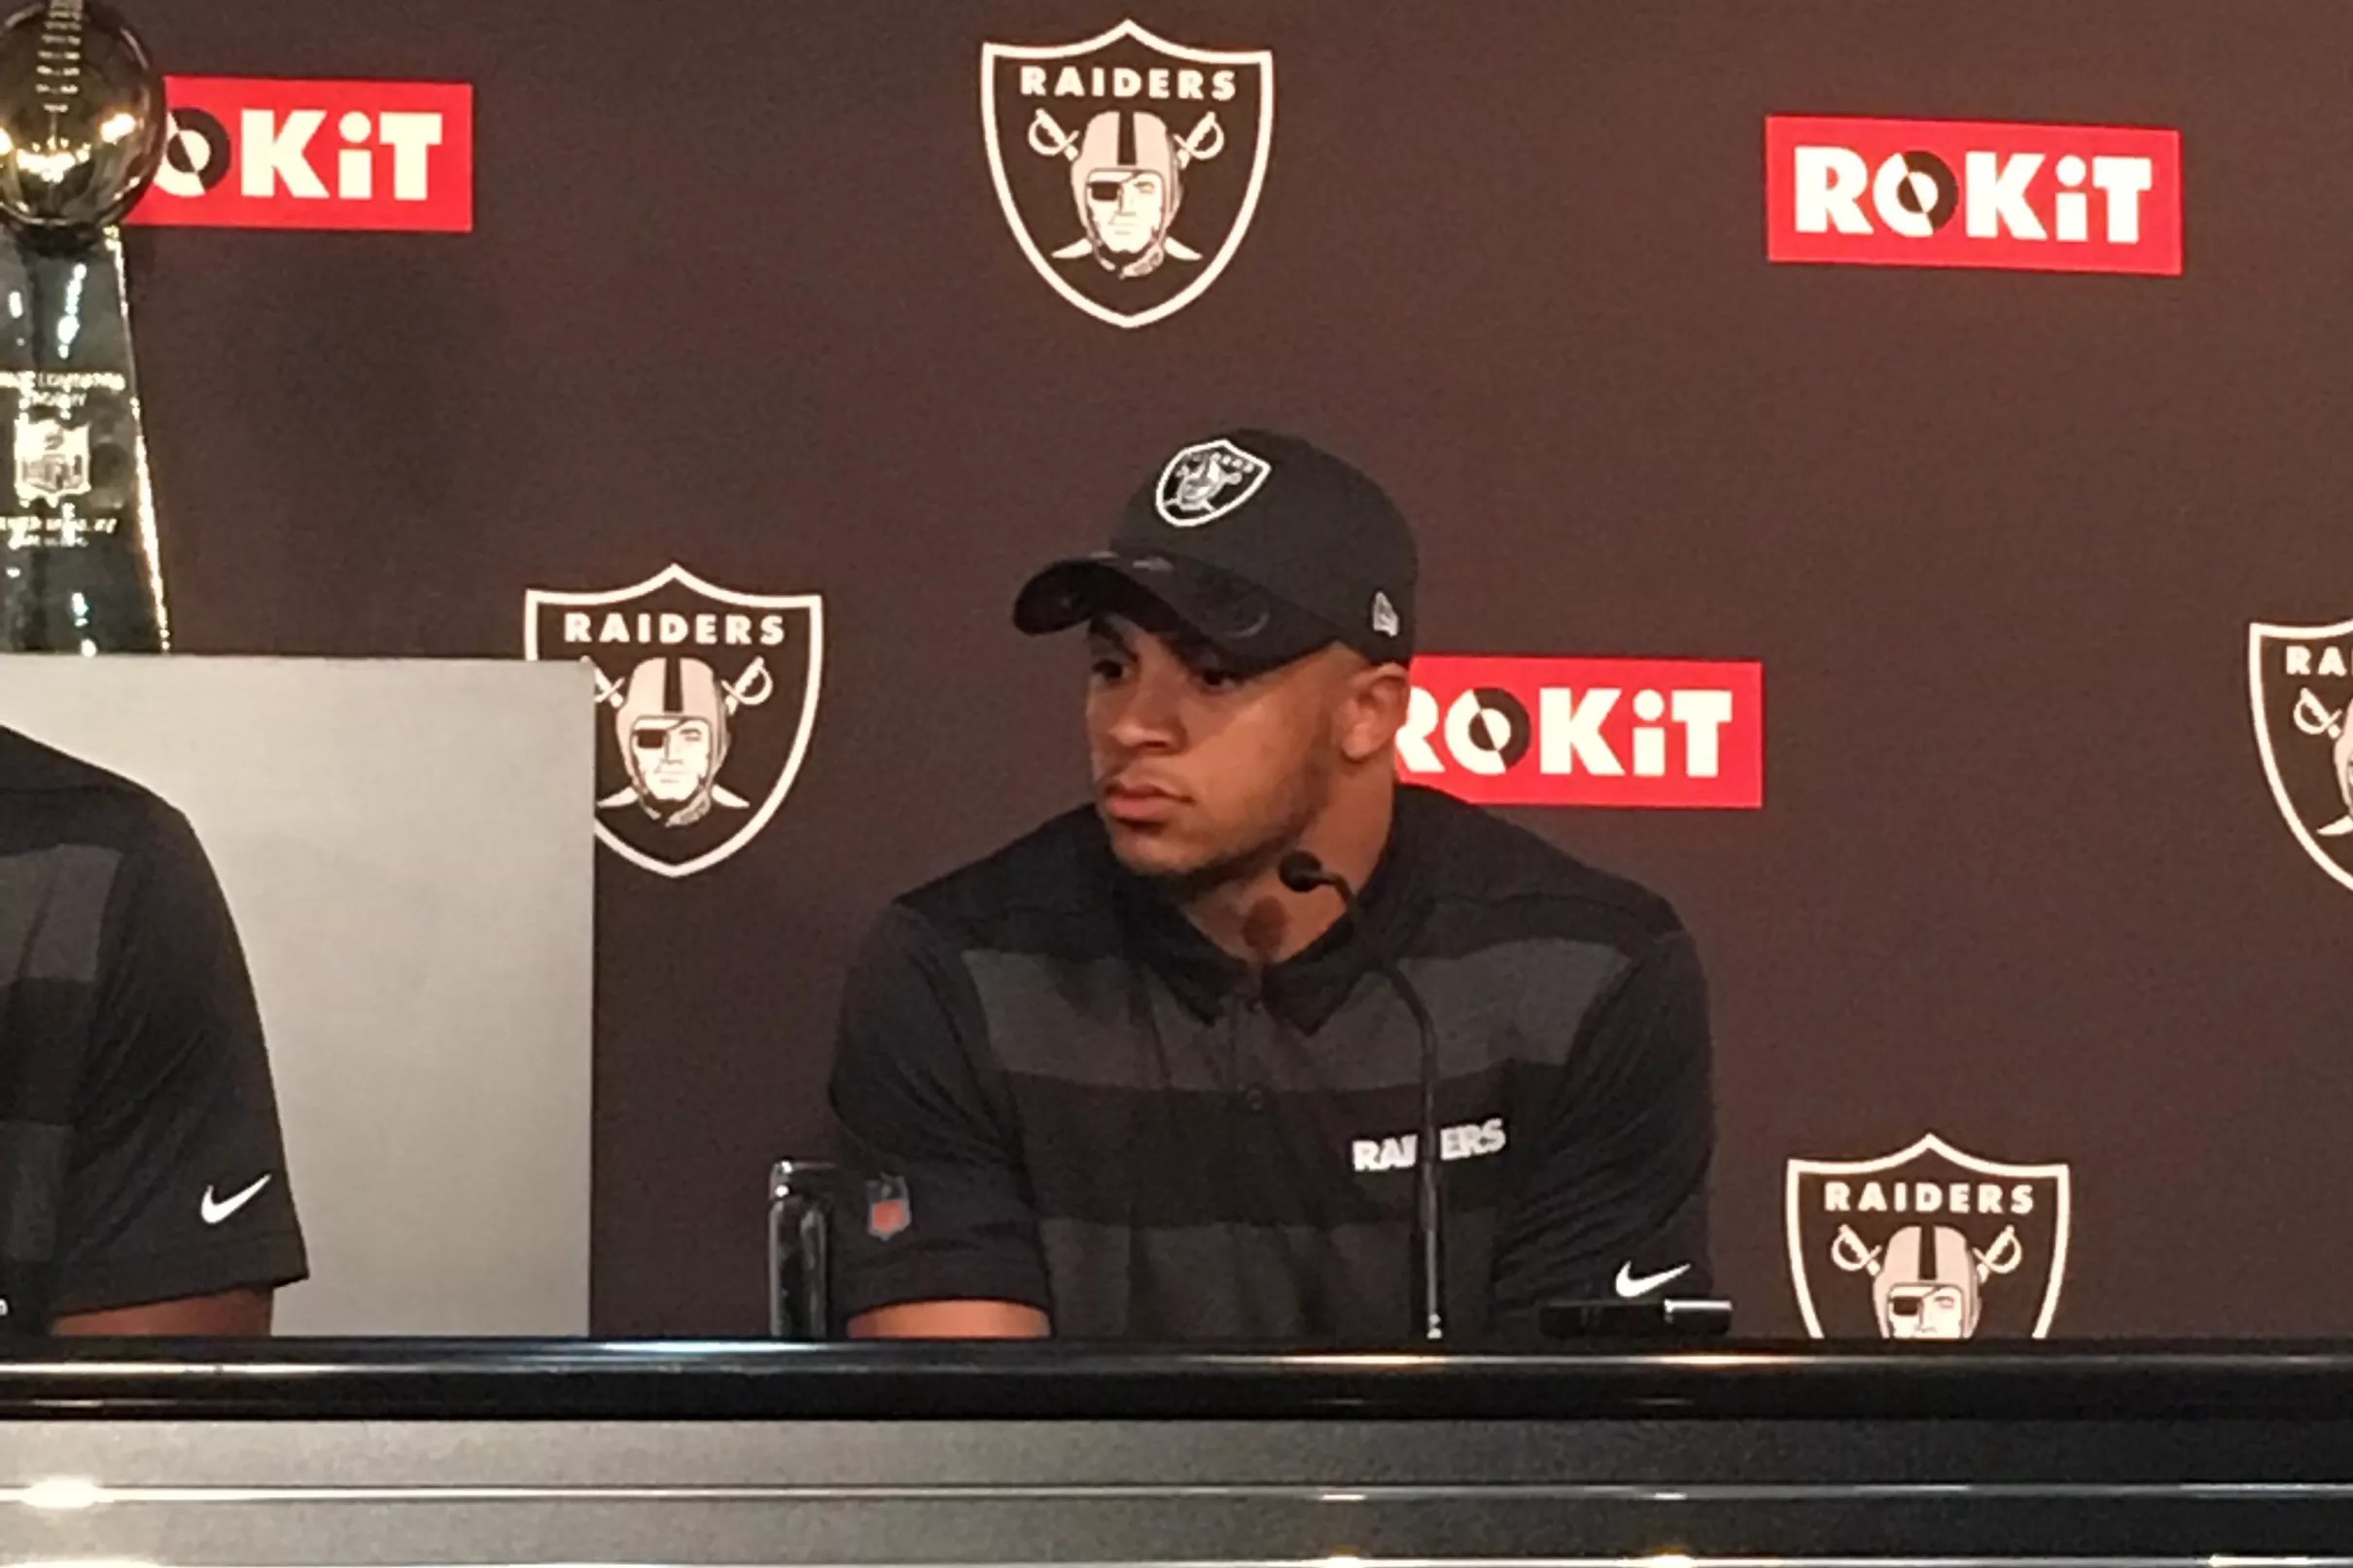 Raiders first round pick safety Johnathan Abram will wear number 24 for